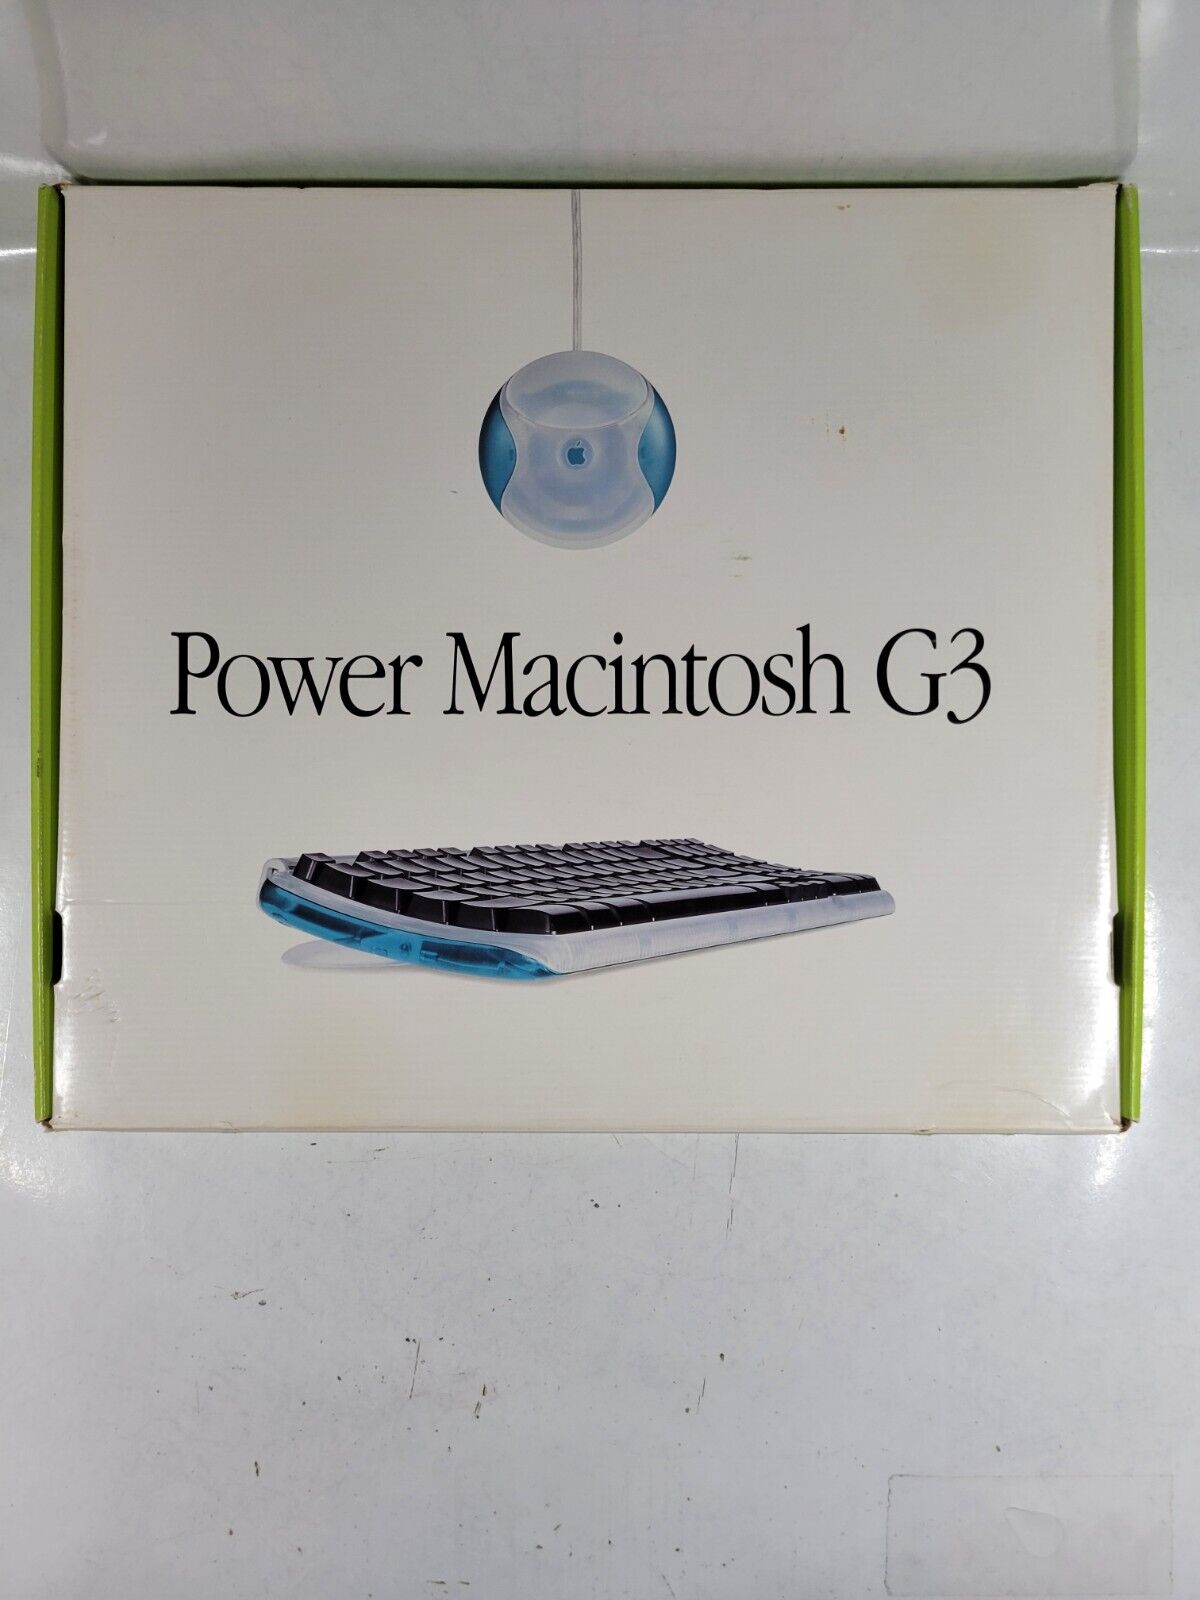 (NEW)APPLE Power Macintosh G3 Accessory Kit(1998)Keyboard/Mouse/Instructions..